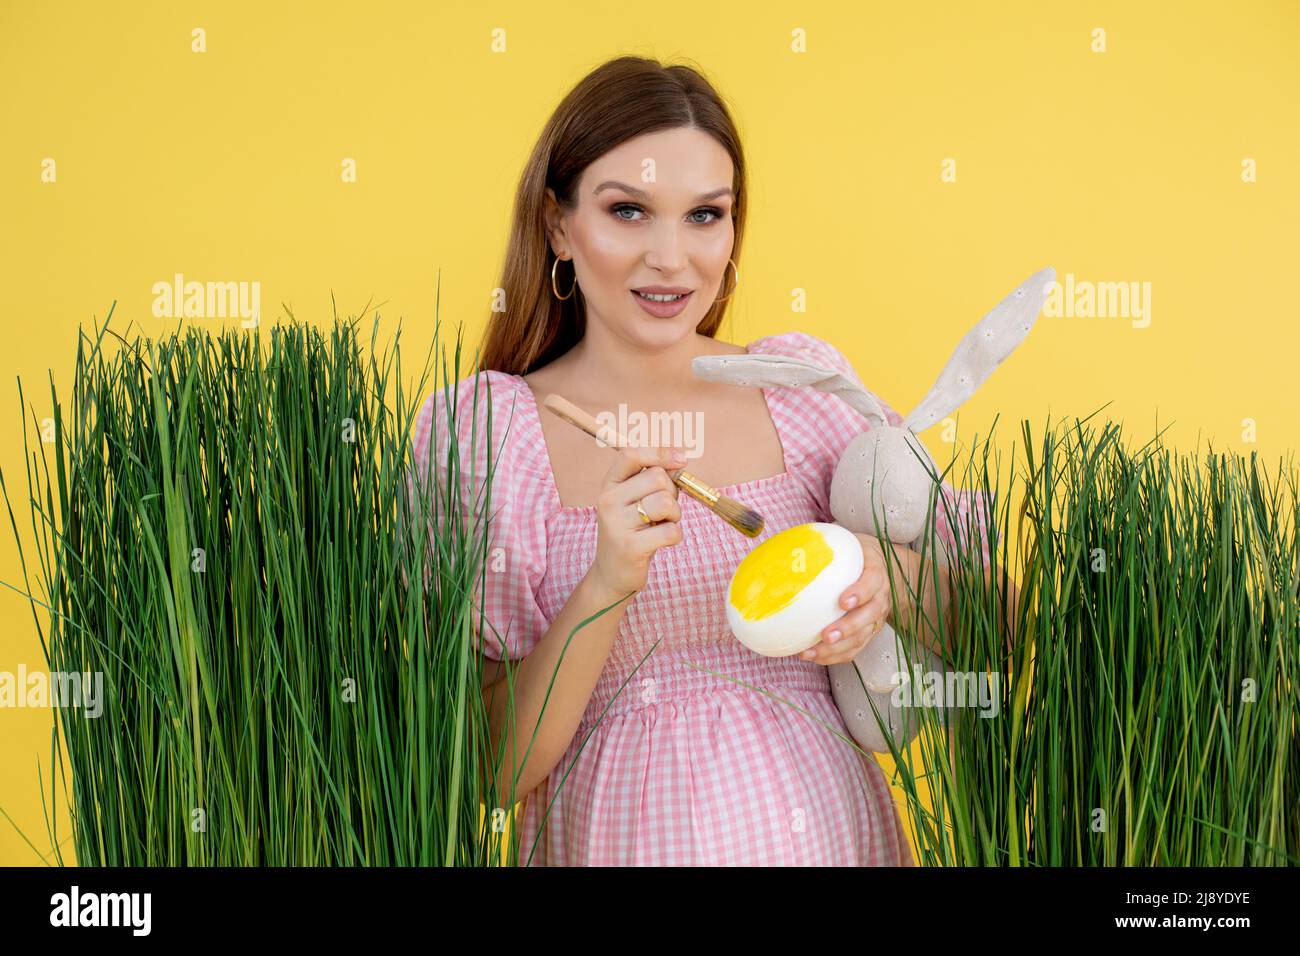 Woman in late pregnancy on grass decoration paint egg with brush and hold soft rabbit toy, yellow background. Portrait of young pregnant lady Stock Photo